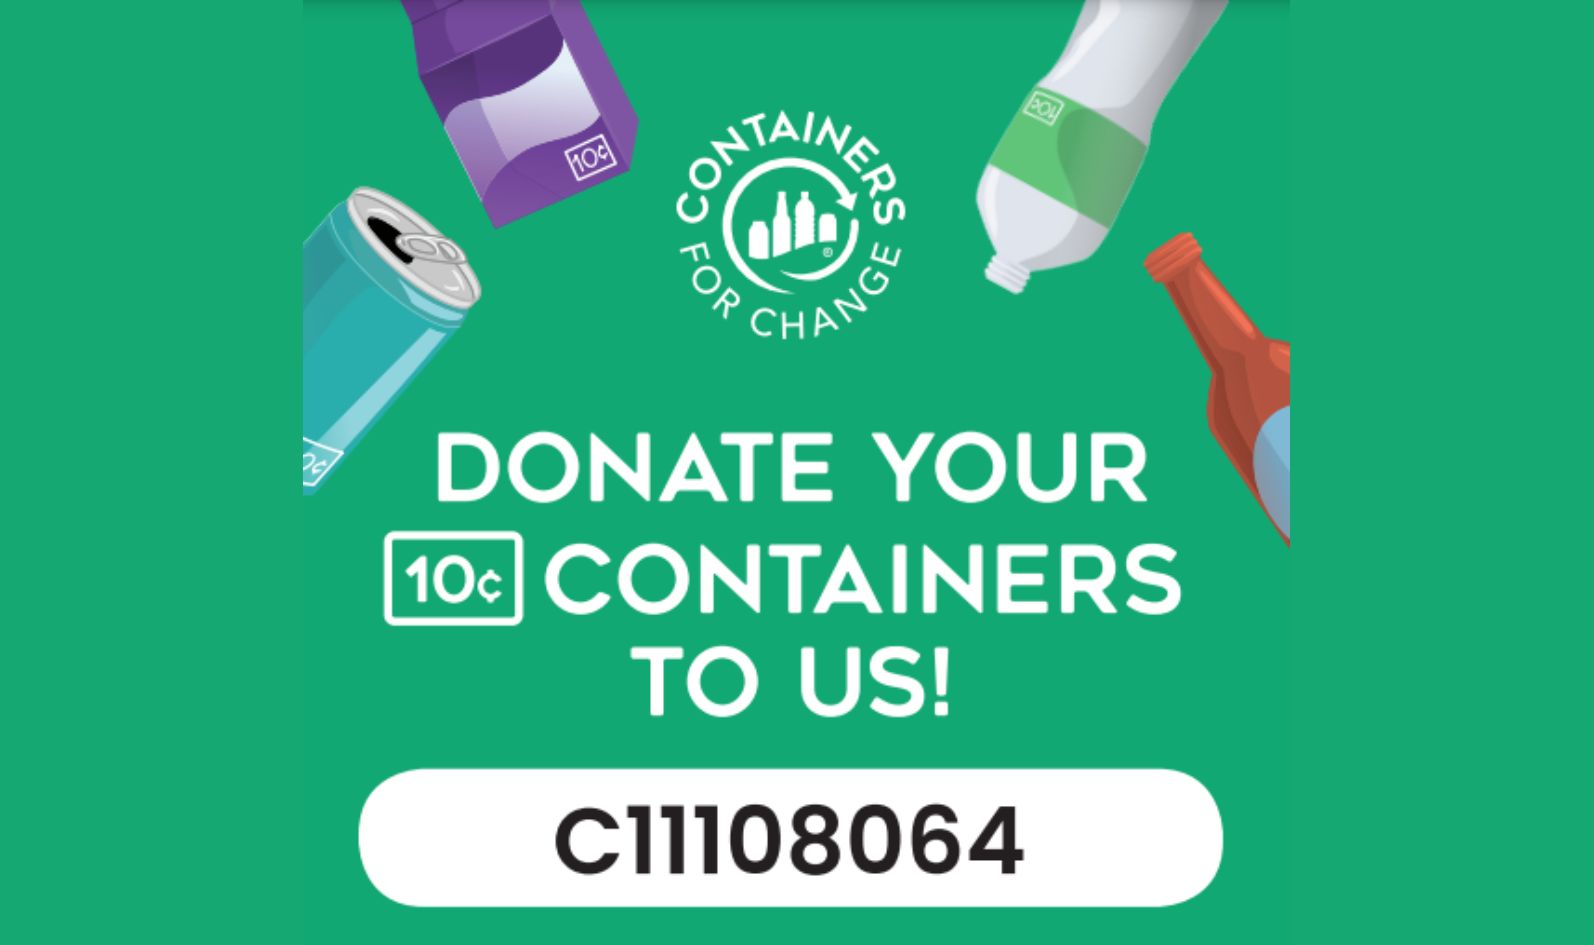 Continue to donate to our building fund by recycling with Containers For Change. Use our code C111108064.